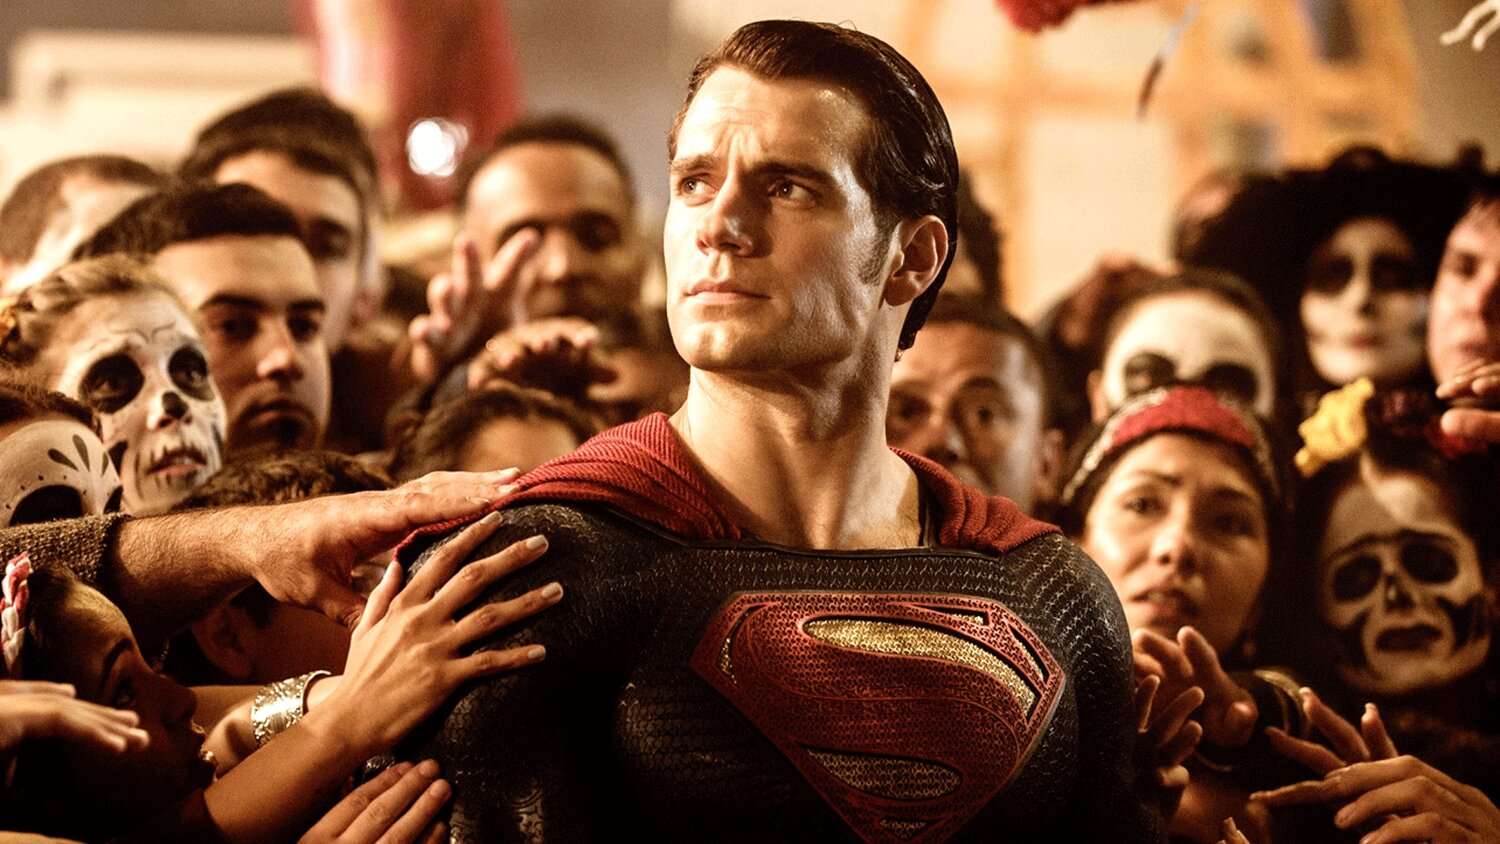 Henry Cavill on losing his iconic role: 'Superman is still around' - Your  Guide to the Big City